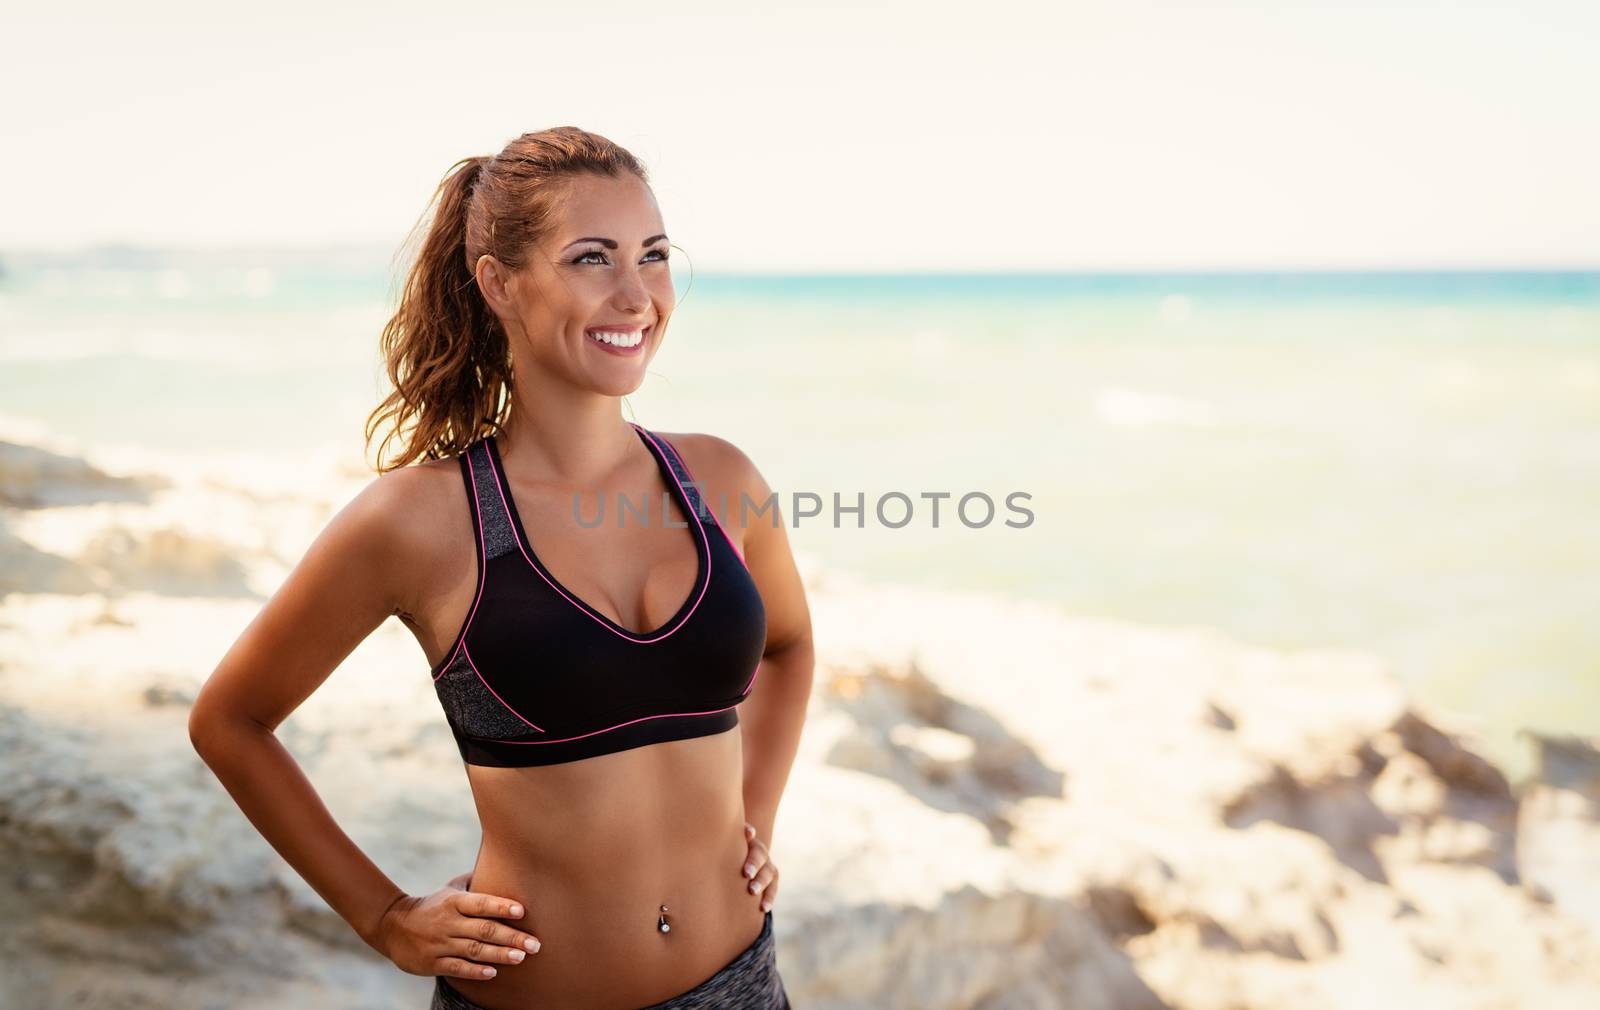 Fitness Girl On The Beach by MilanMarkovic78